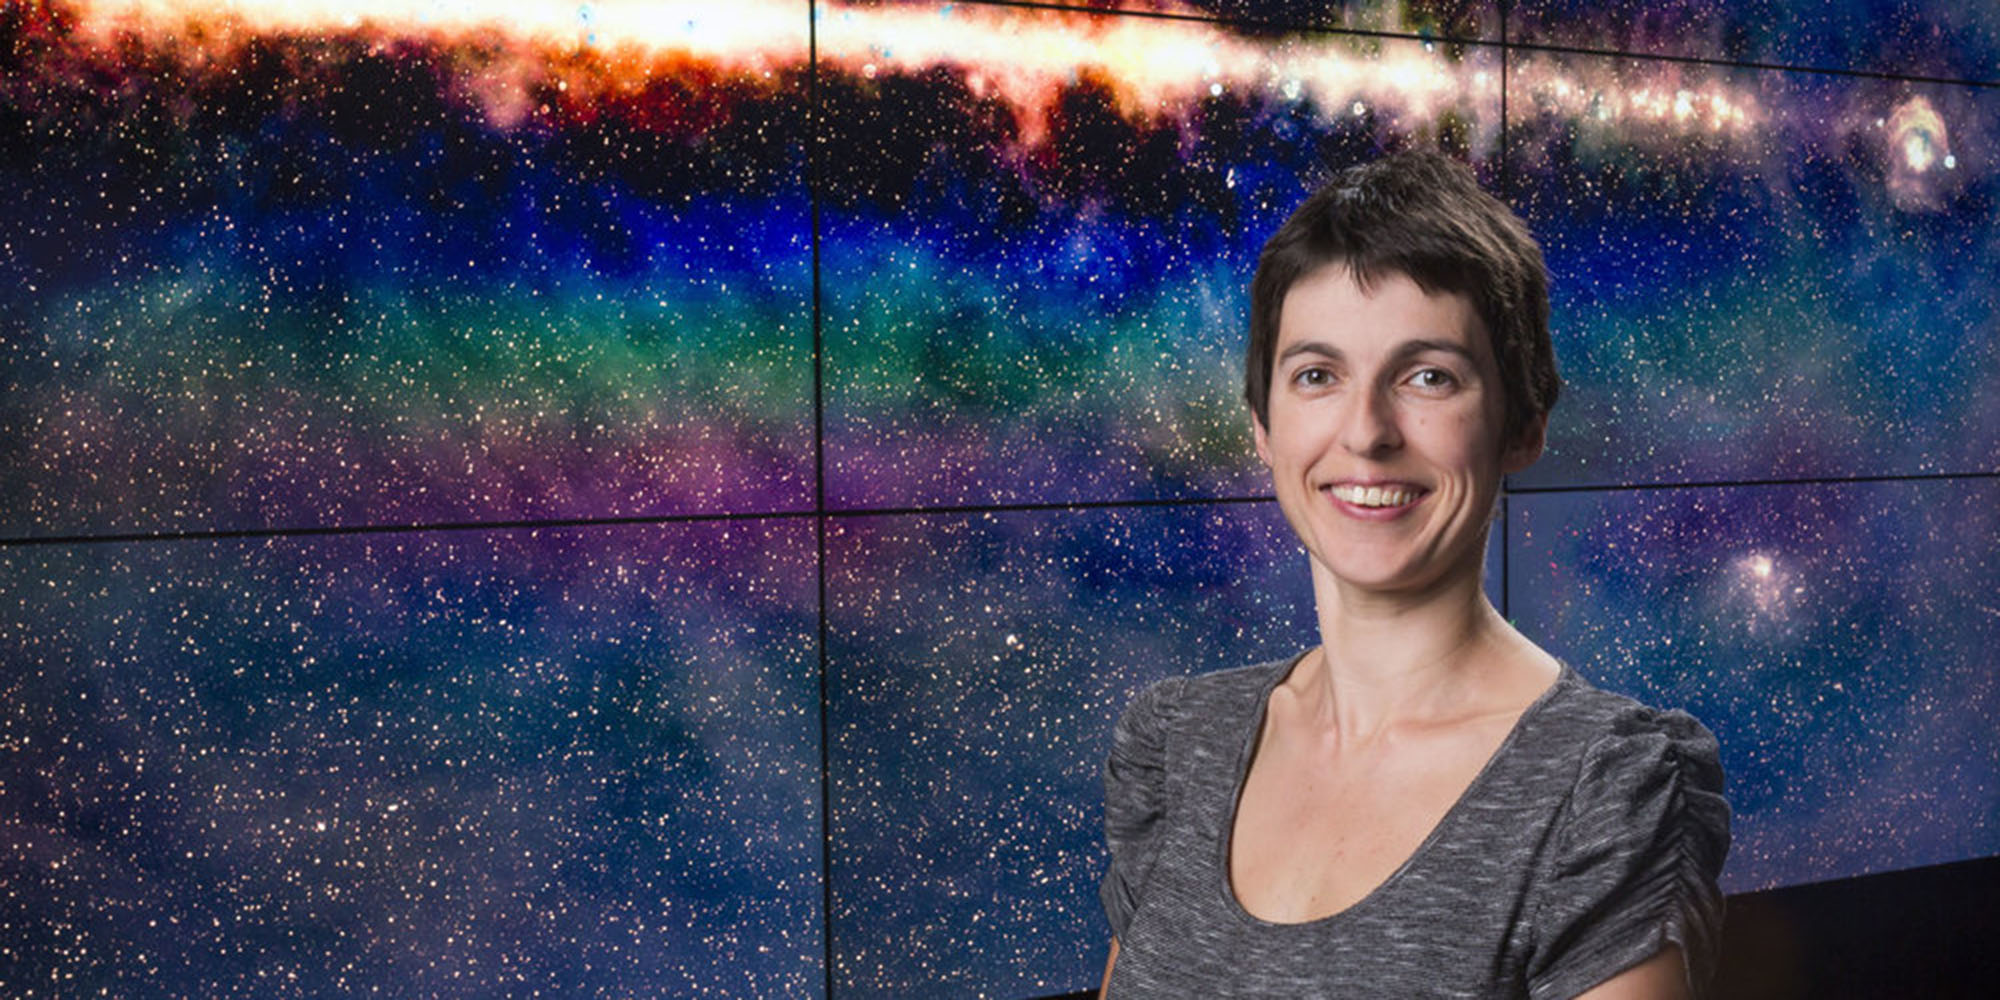 Researcher Natasha Hurley standing in front of display of space